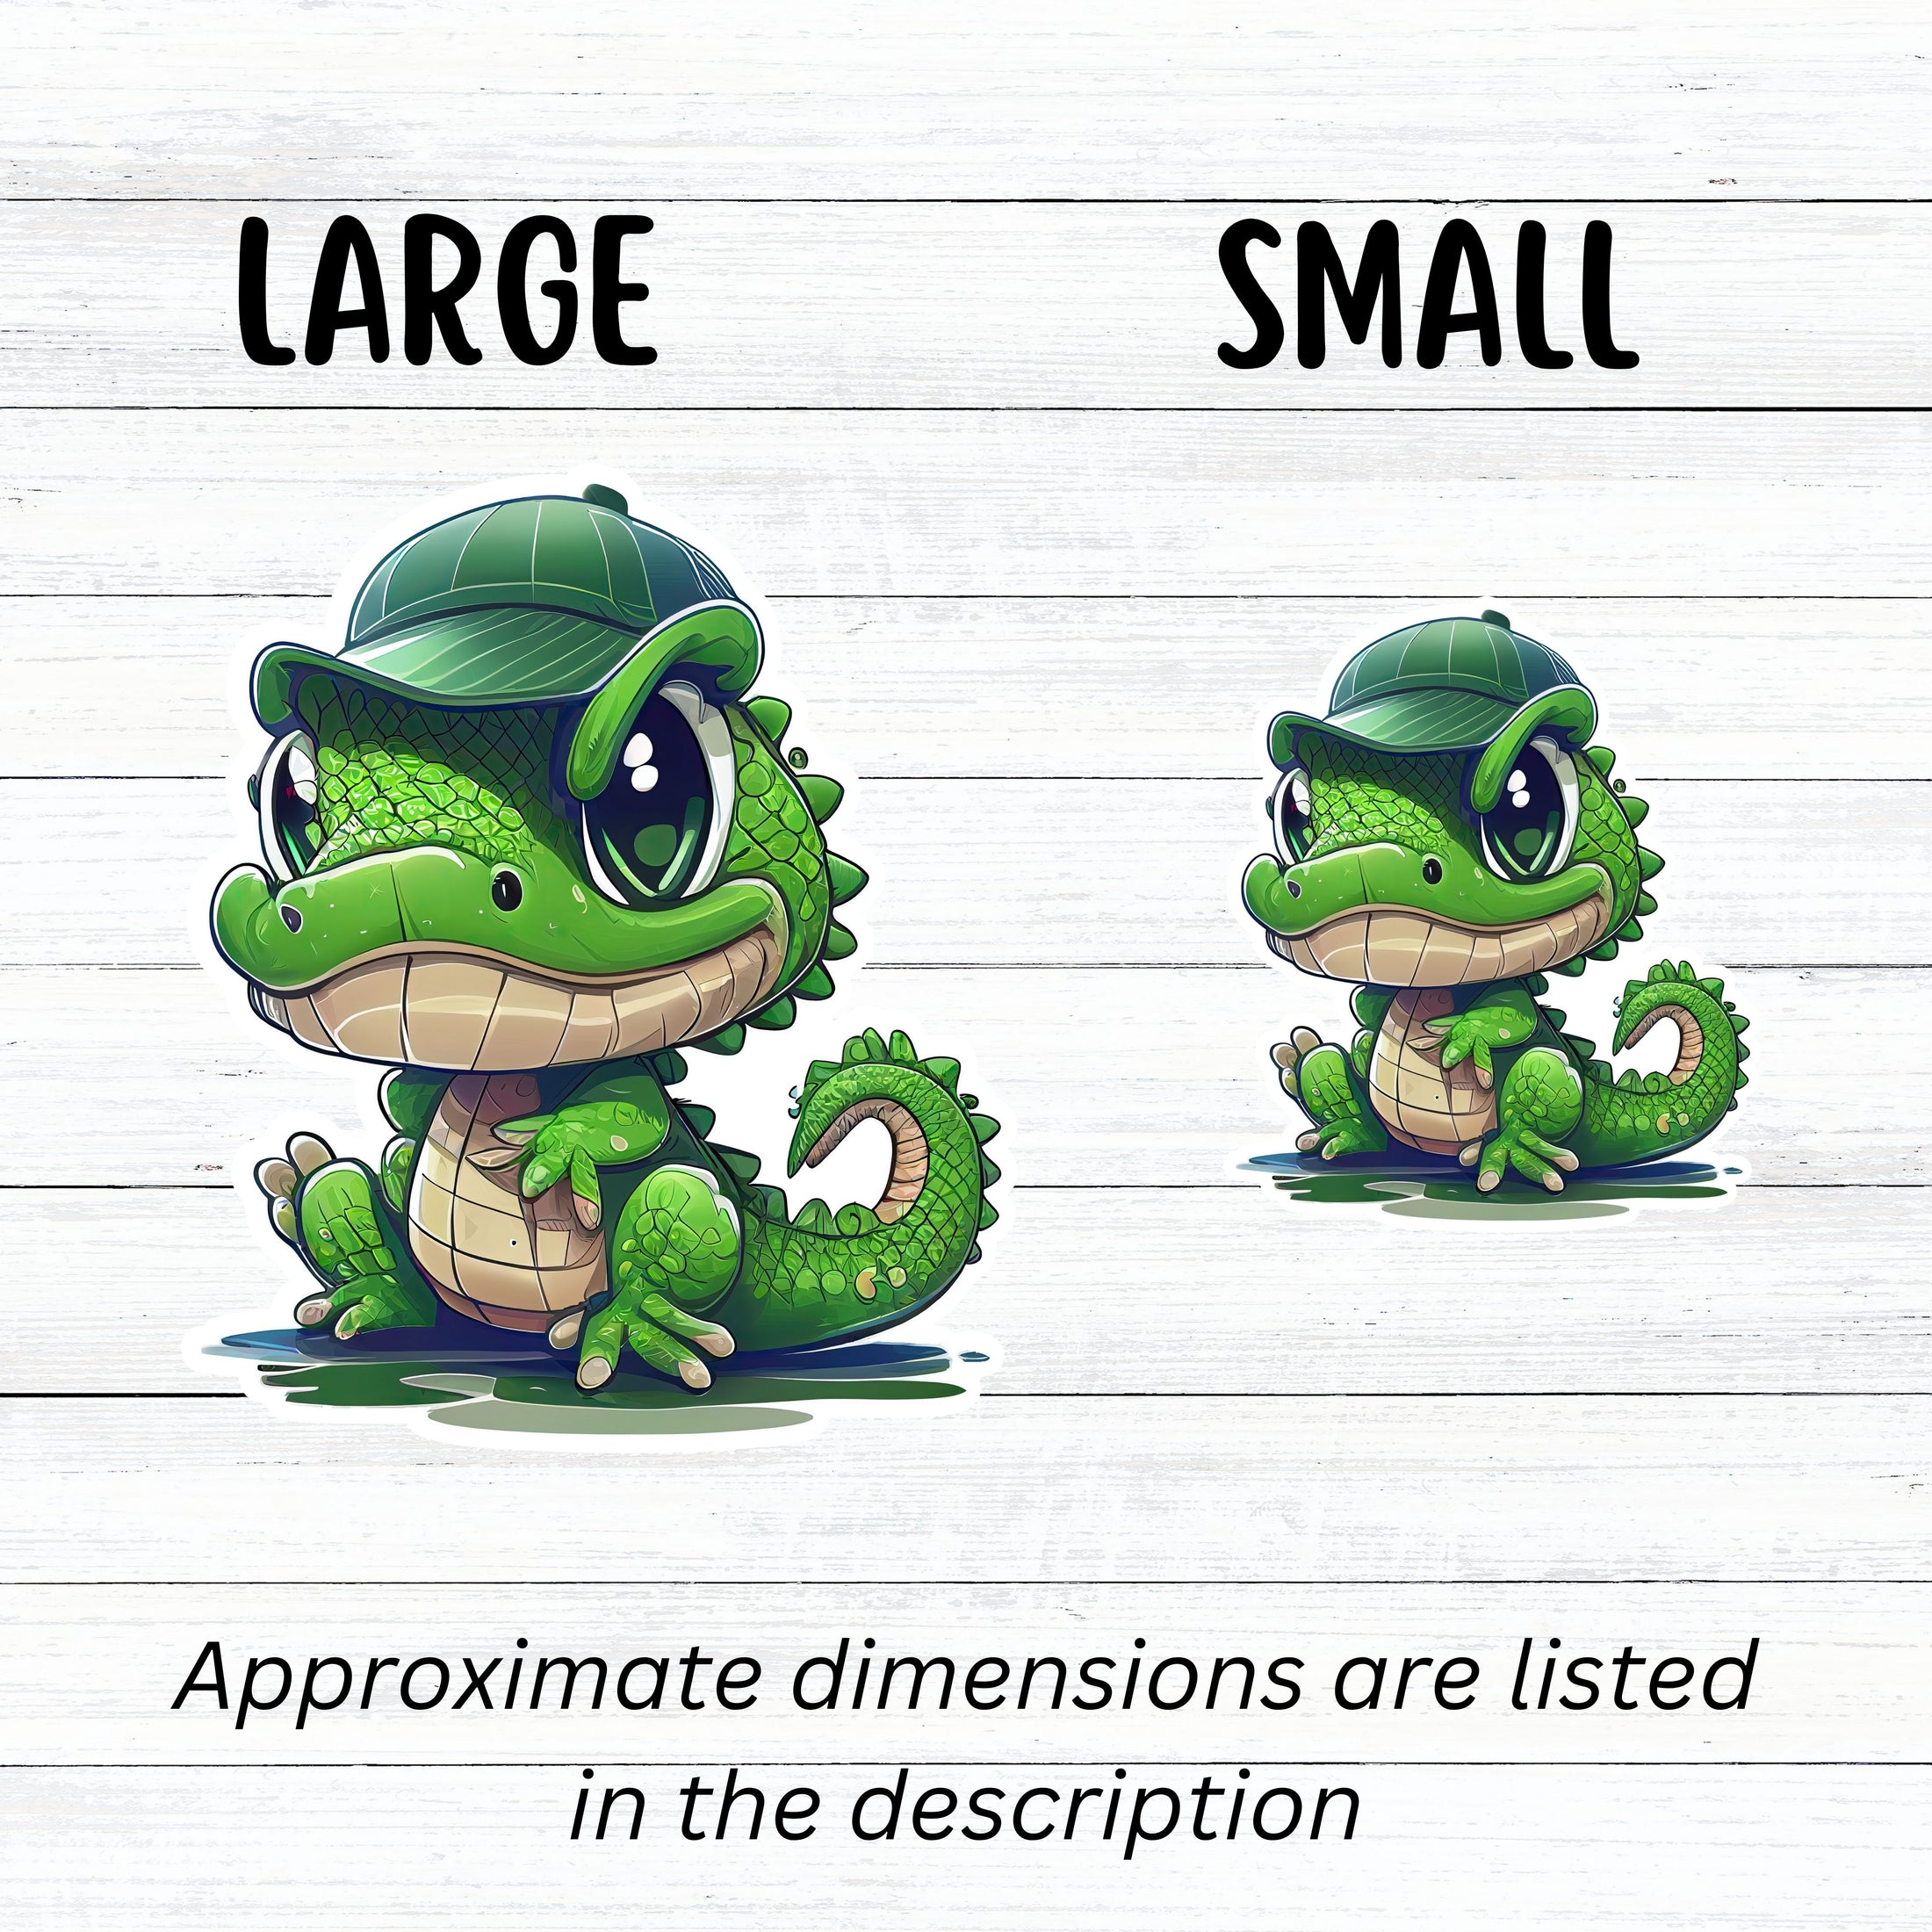 This image shows large and small crocodile wearing hat stickers next to each other.